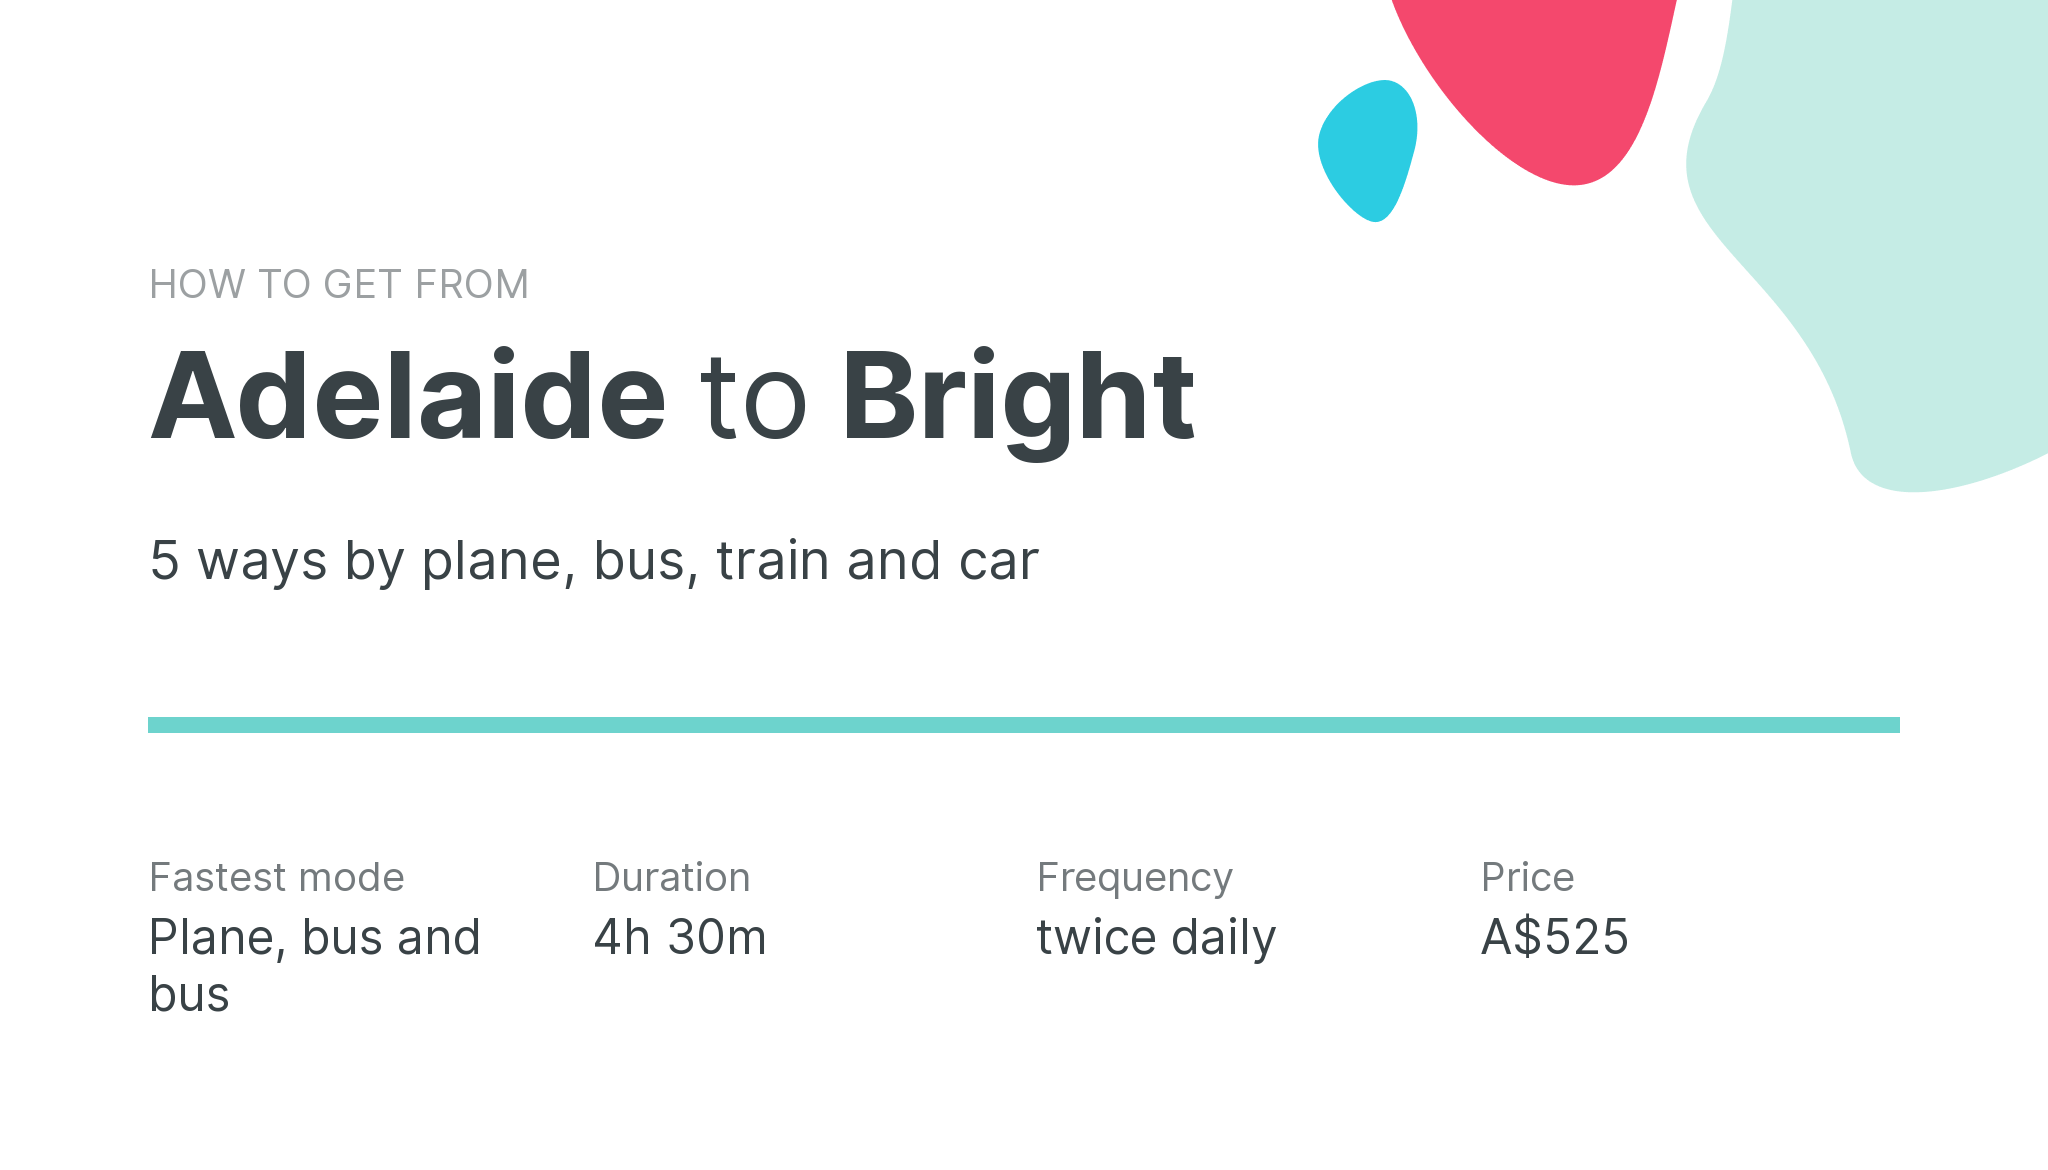 How do I get from Adelaide to Bright